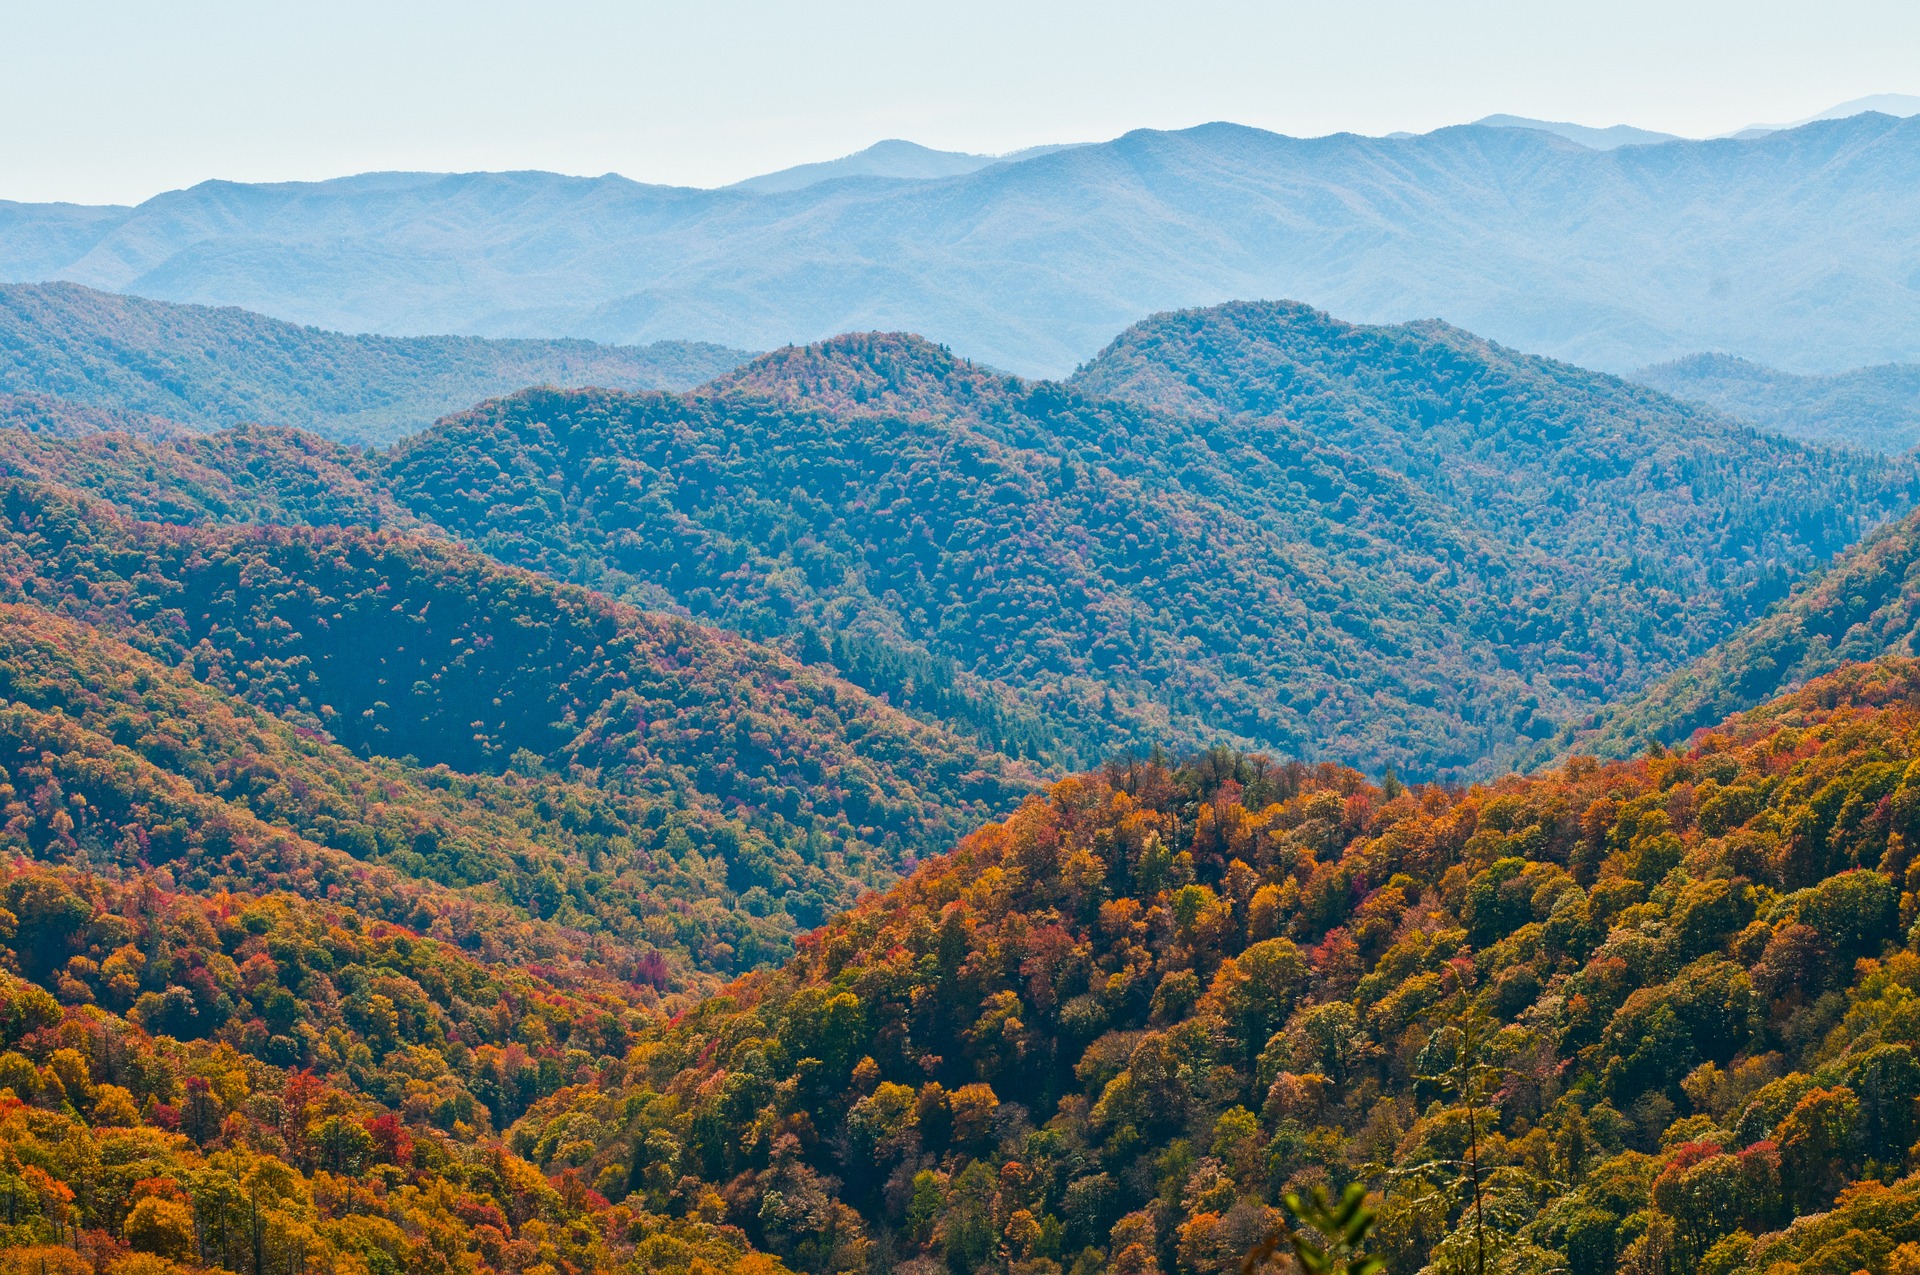 Enjoy the sights of the smoky mountains when you vacation to Gatlinburg